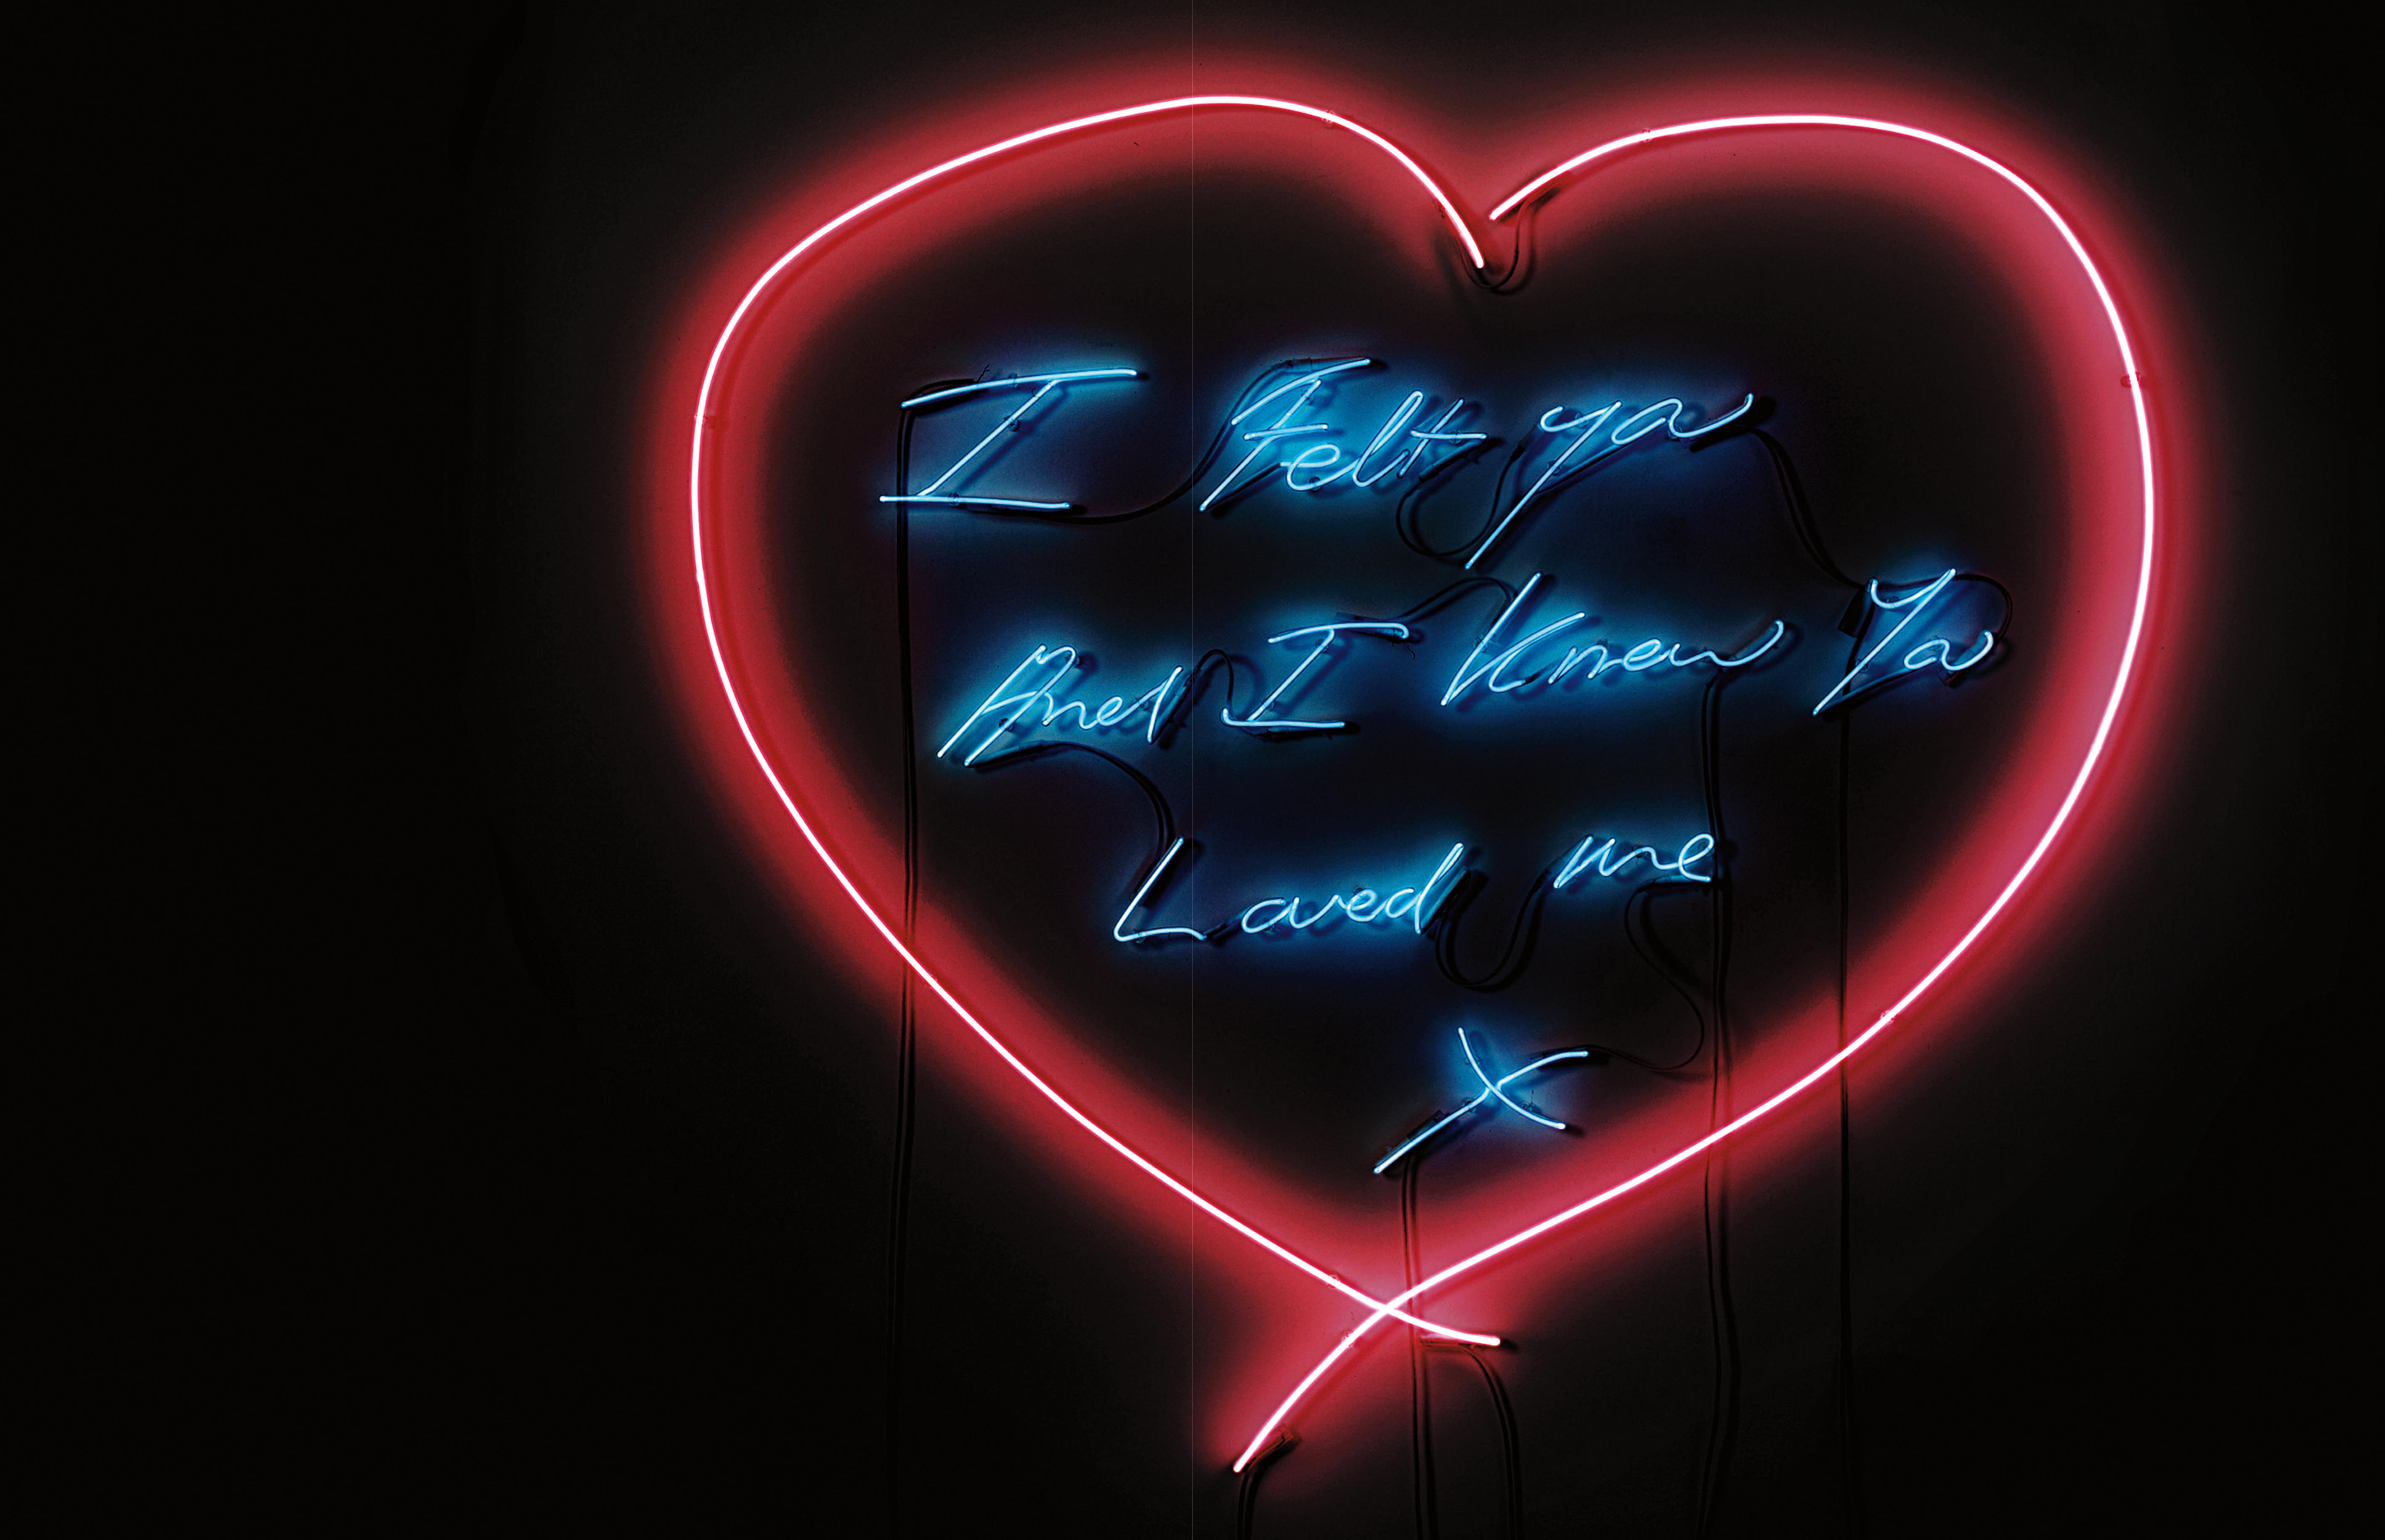 Tracey Emin S Neon Signs The Obscenity And Heartache